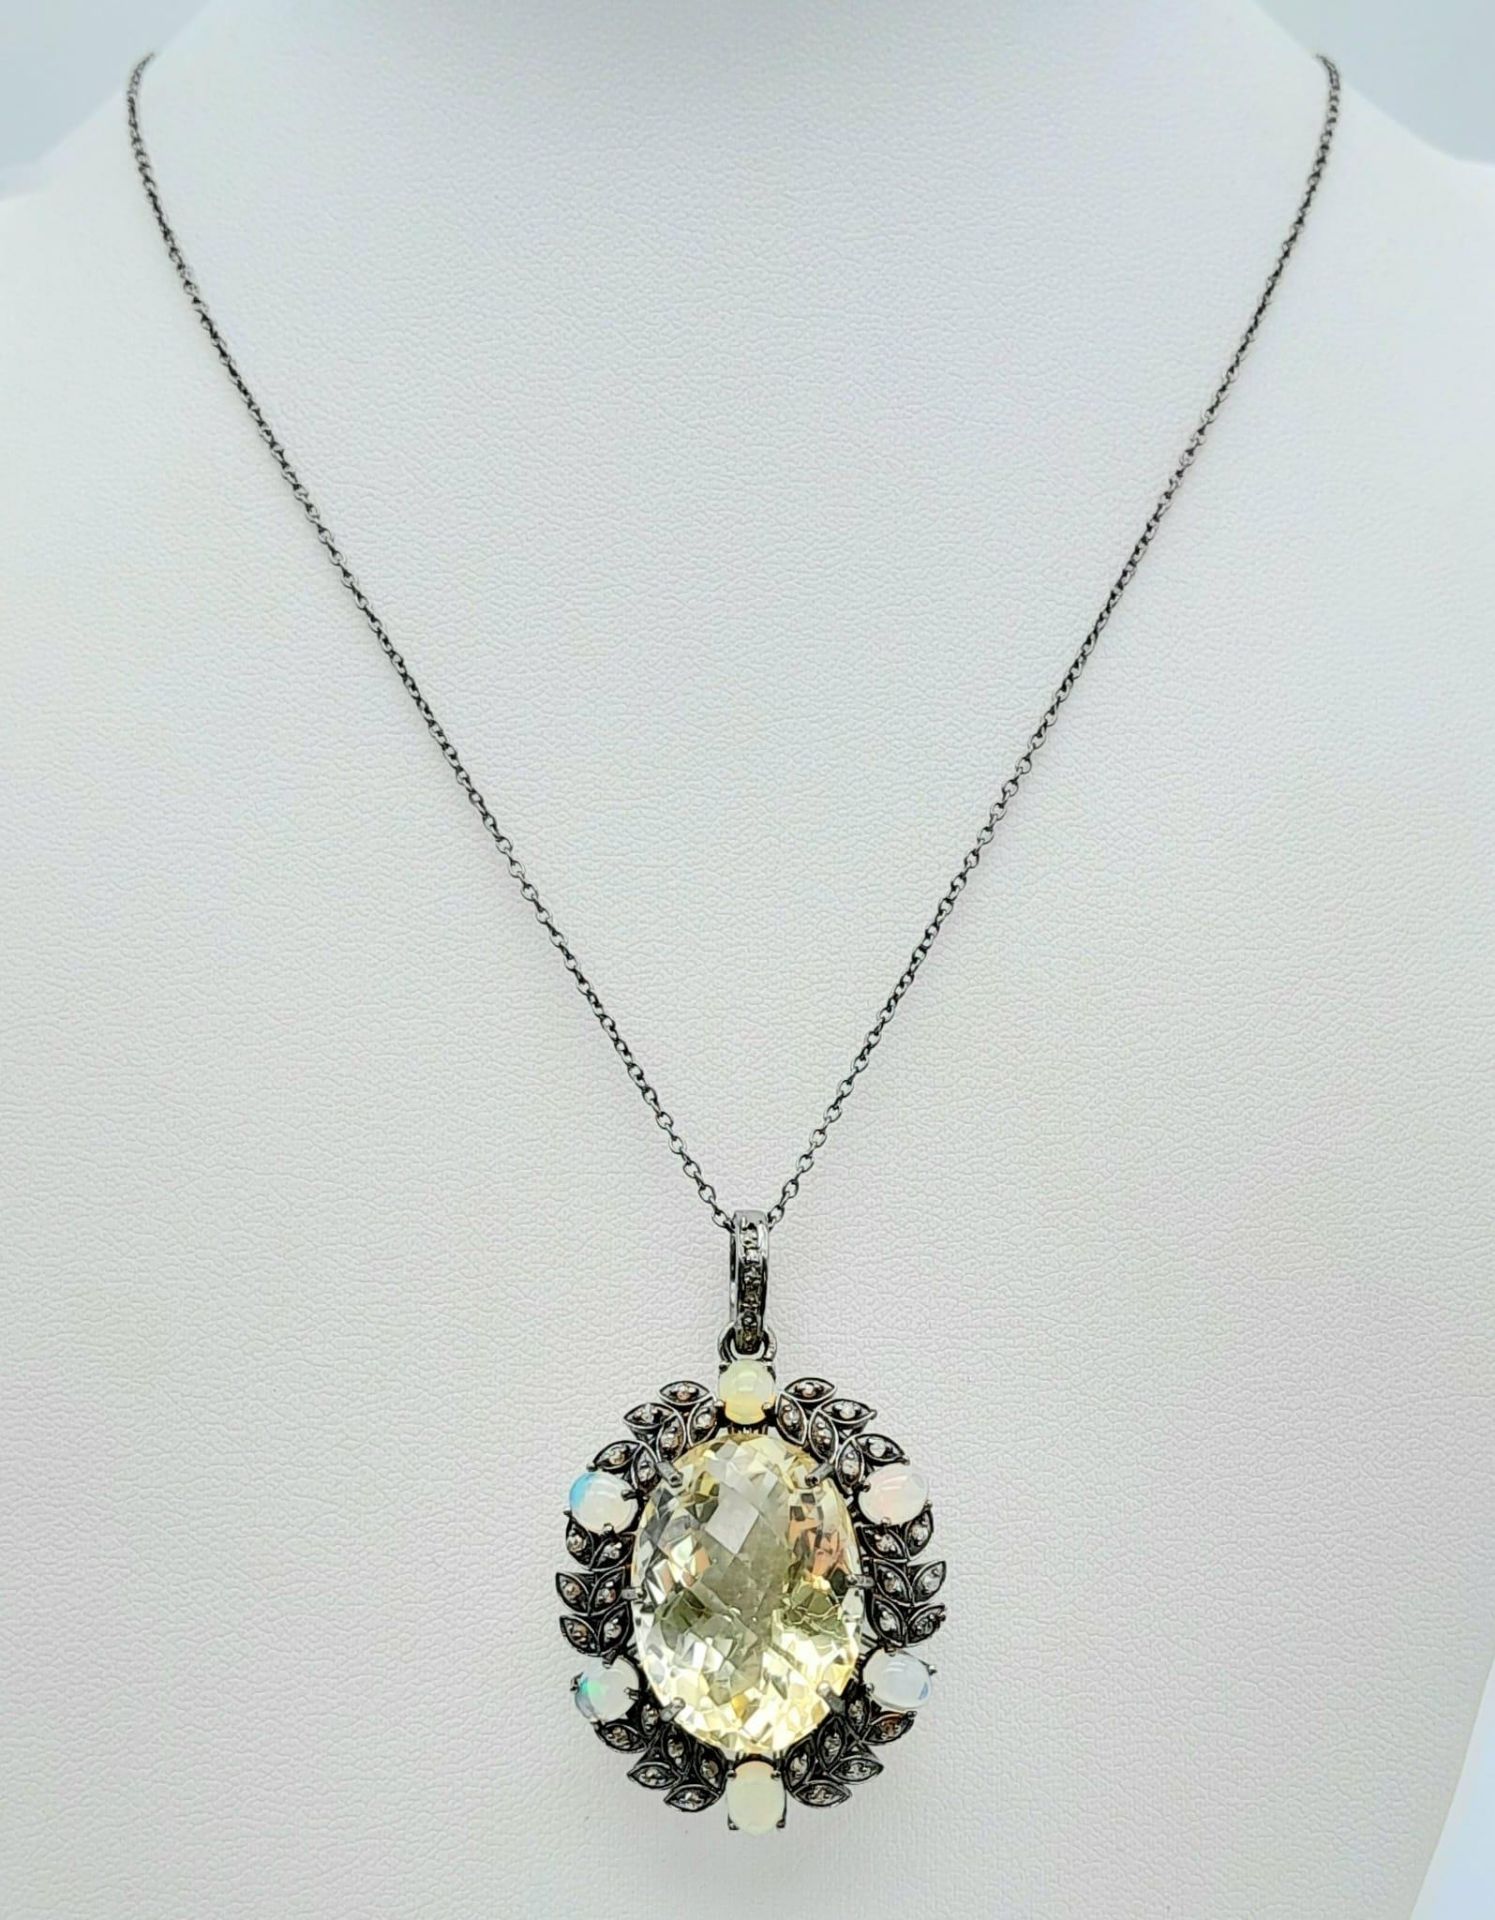 A Citrine Pendant with Opal and Diamond Surround on 925 Silver Chain.22ct citrine, 1.30ctw opals, - Image 2 of 6